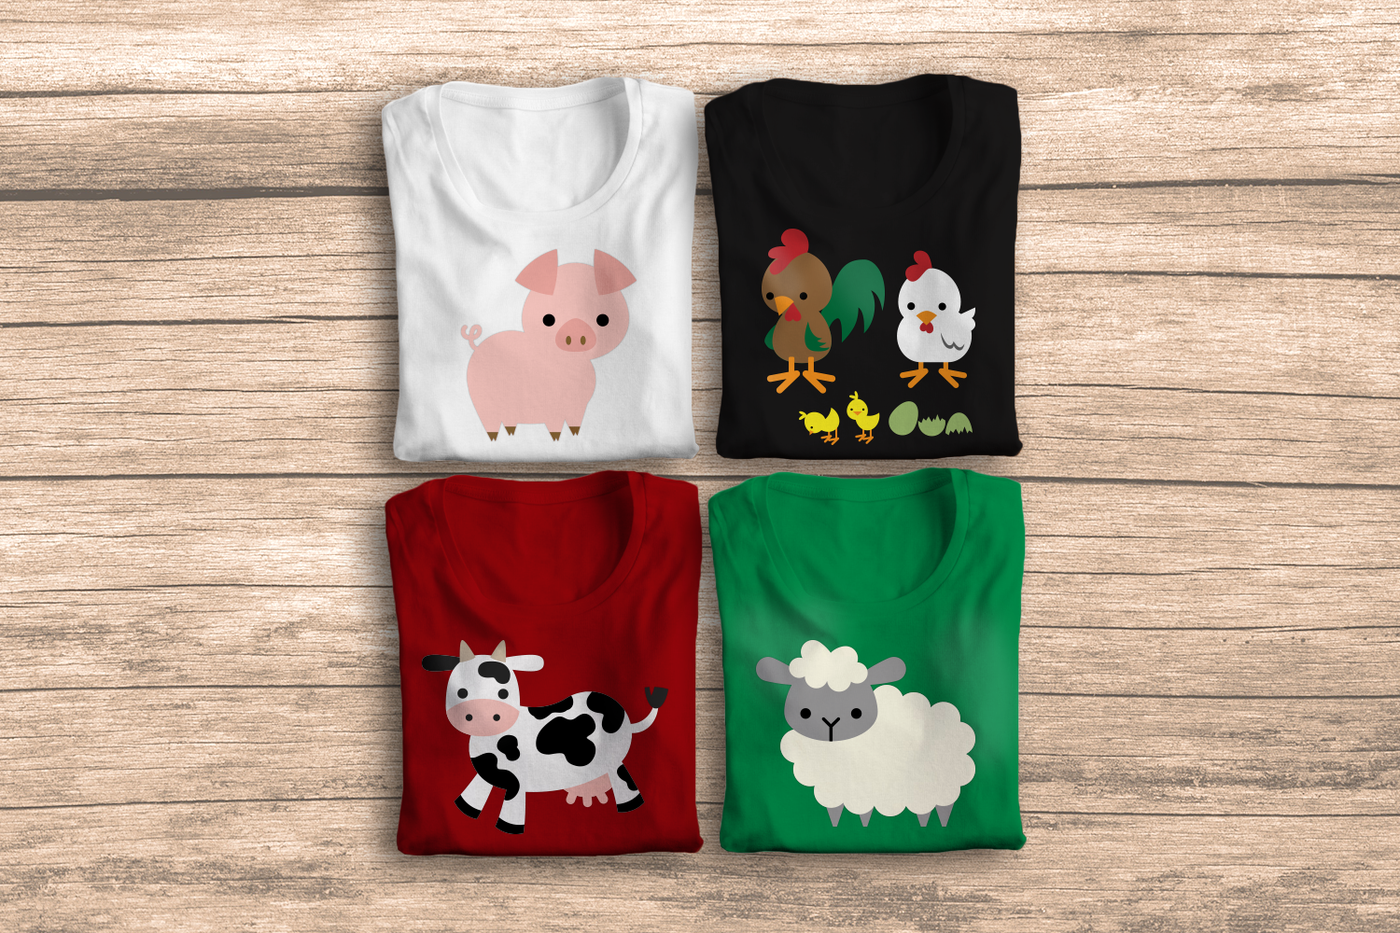 Four folded tees, each with different cute cartoon animals. There is a pig, a cow, a sheep, and a family of chickens.